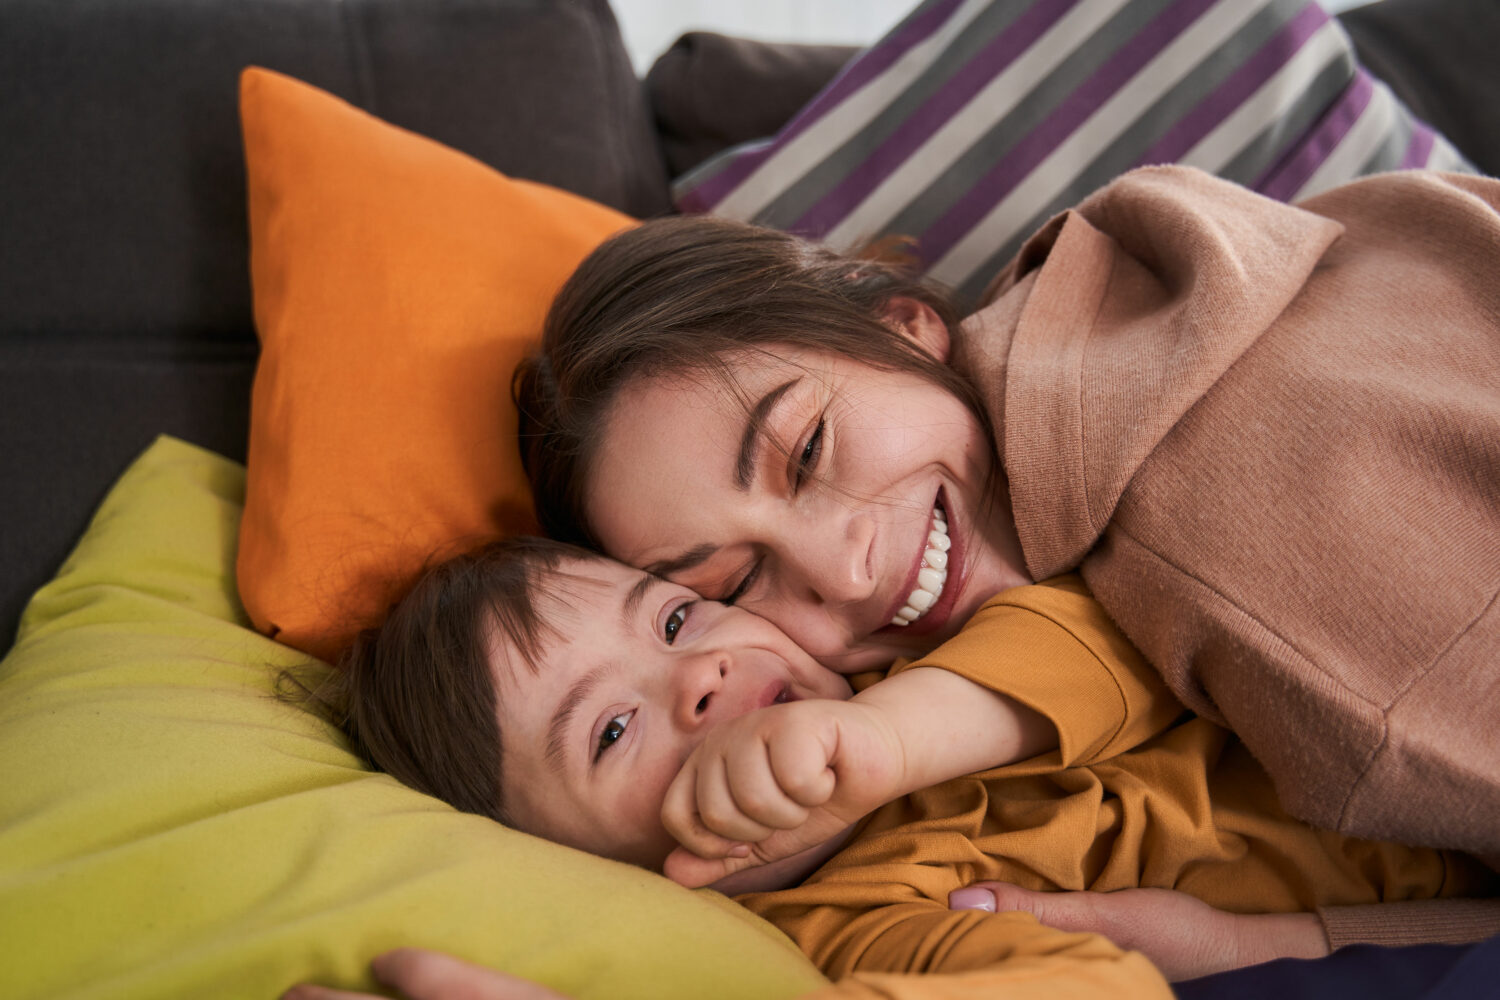 brown haired boy with Down syndrome lying on couch cushions, cuddling with brown haired mom